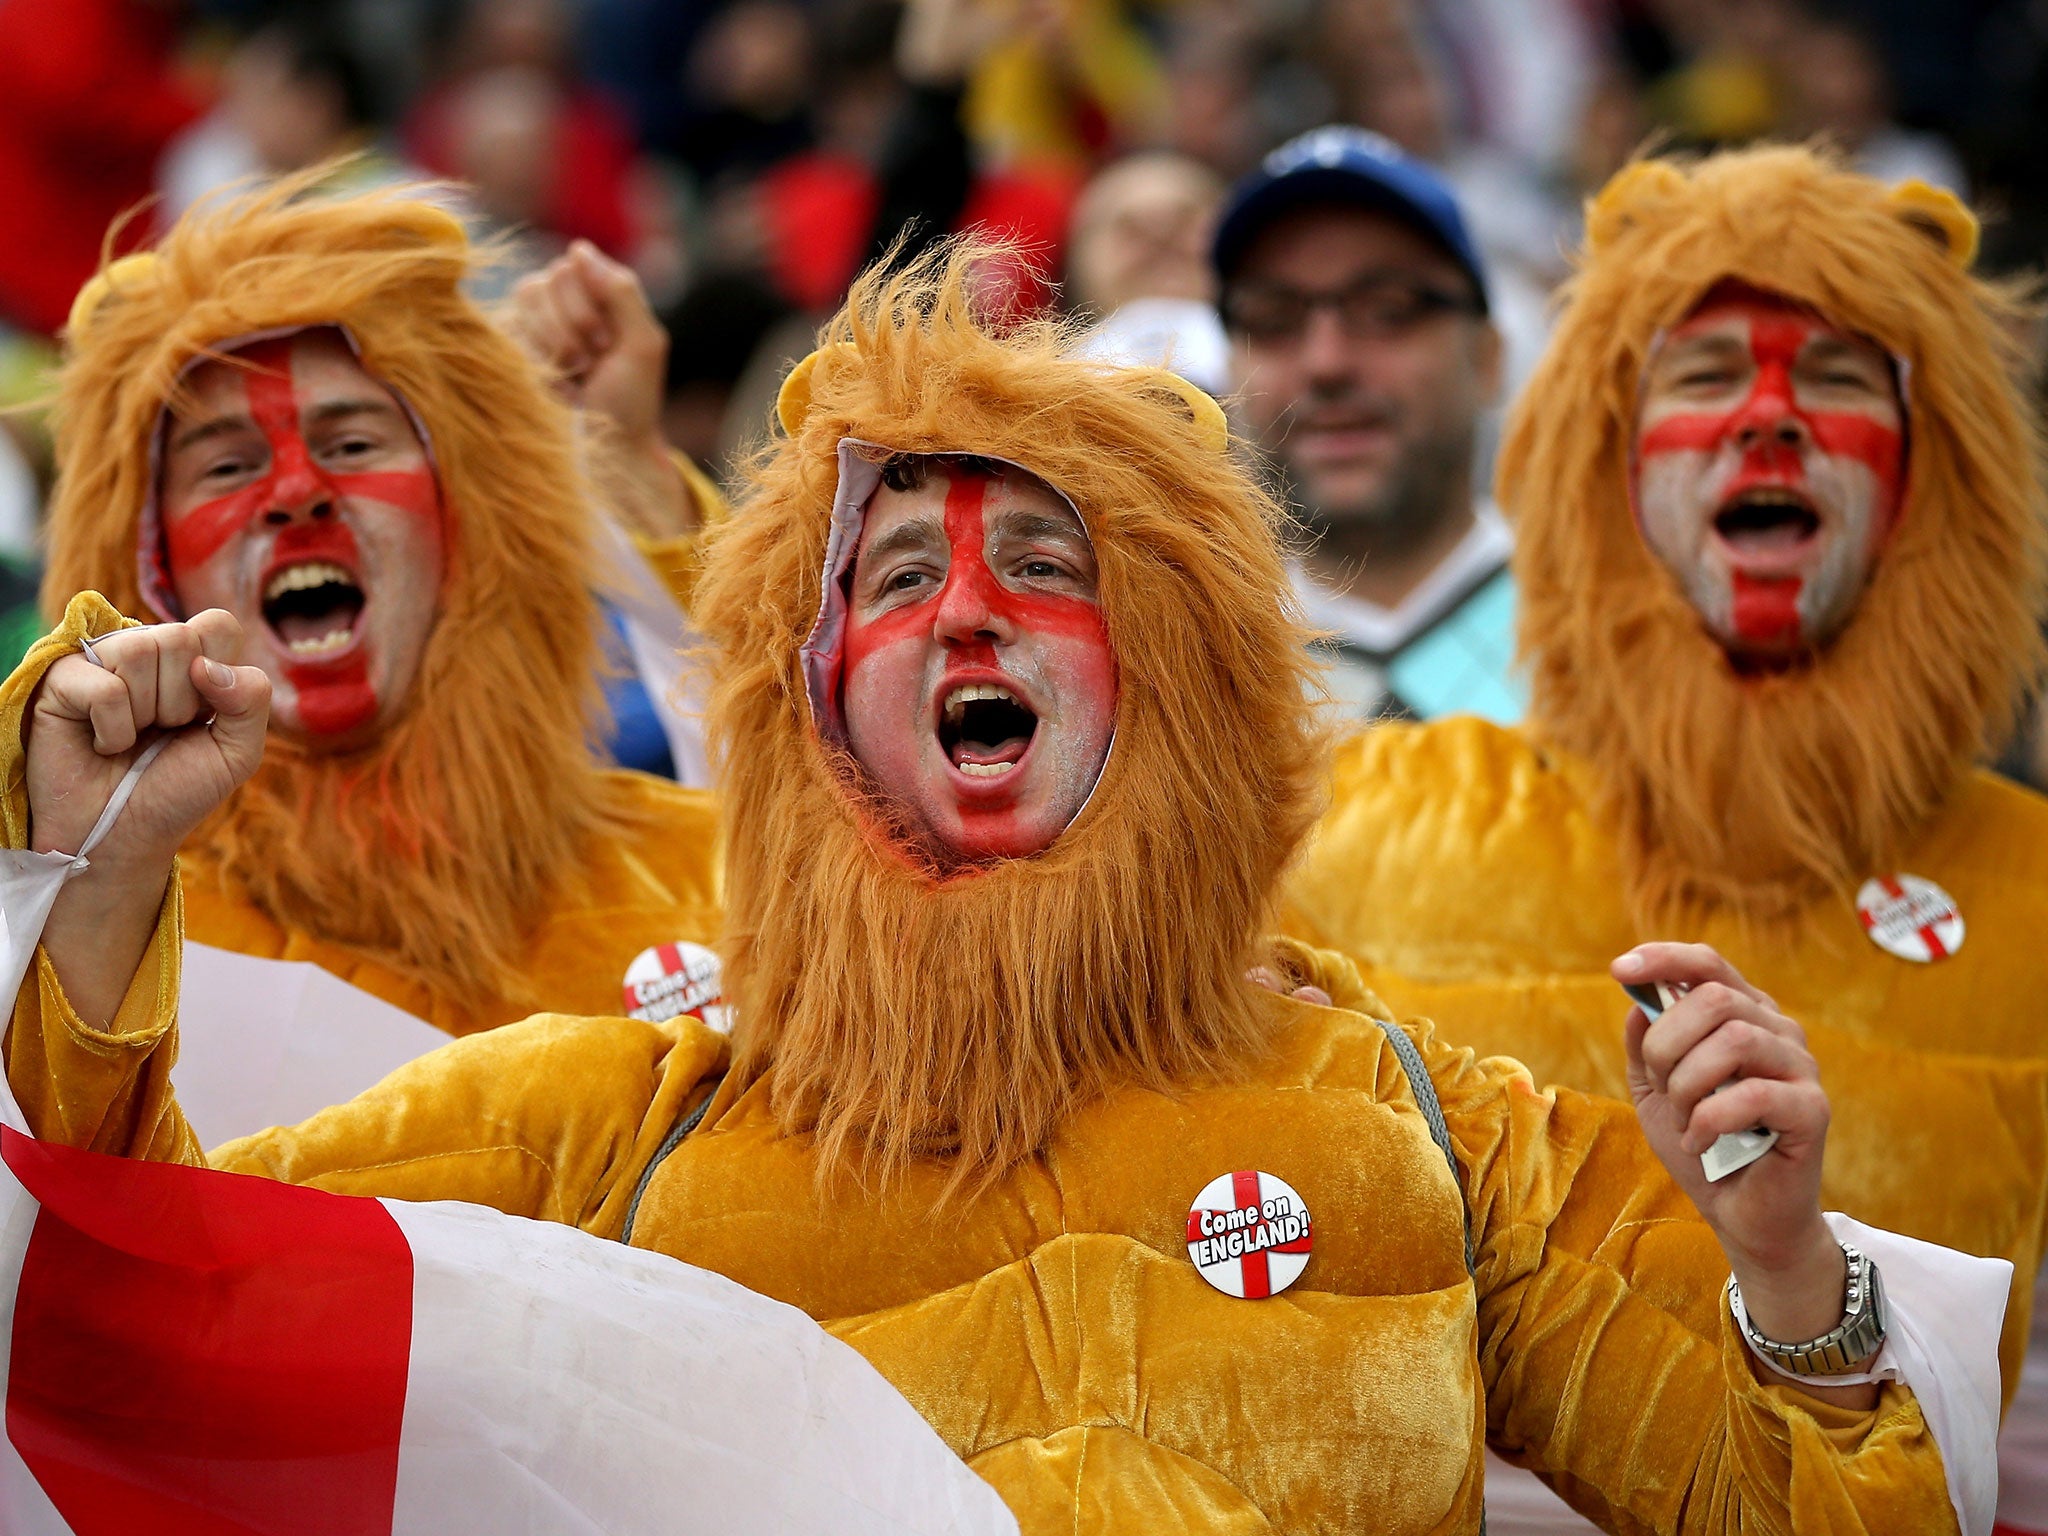 England fans cheer on the side during the 2-1 defeat to Uruguay